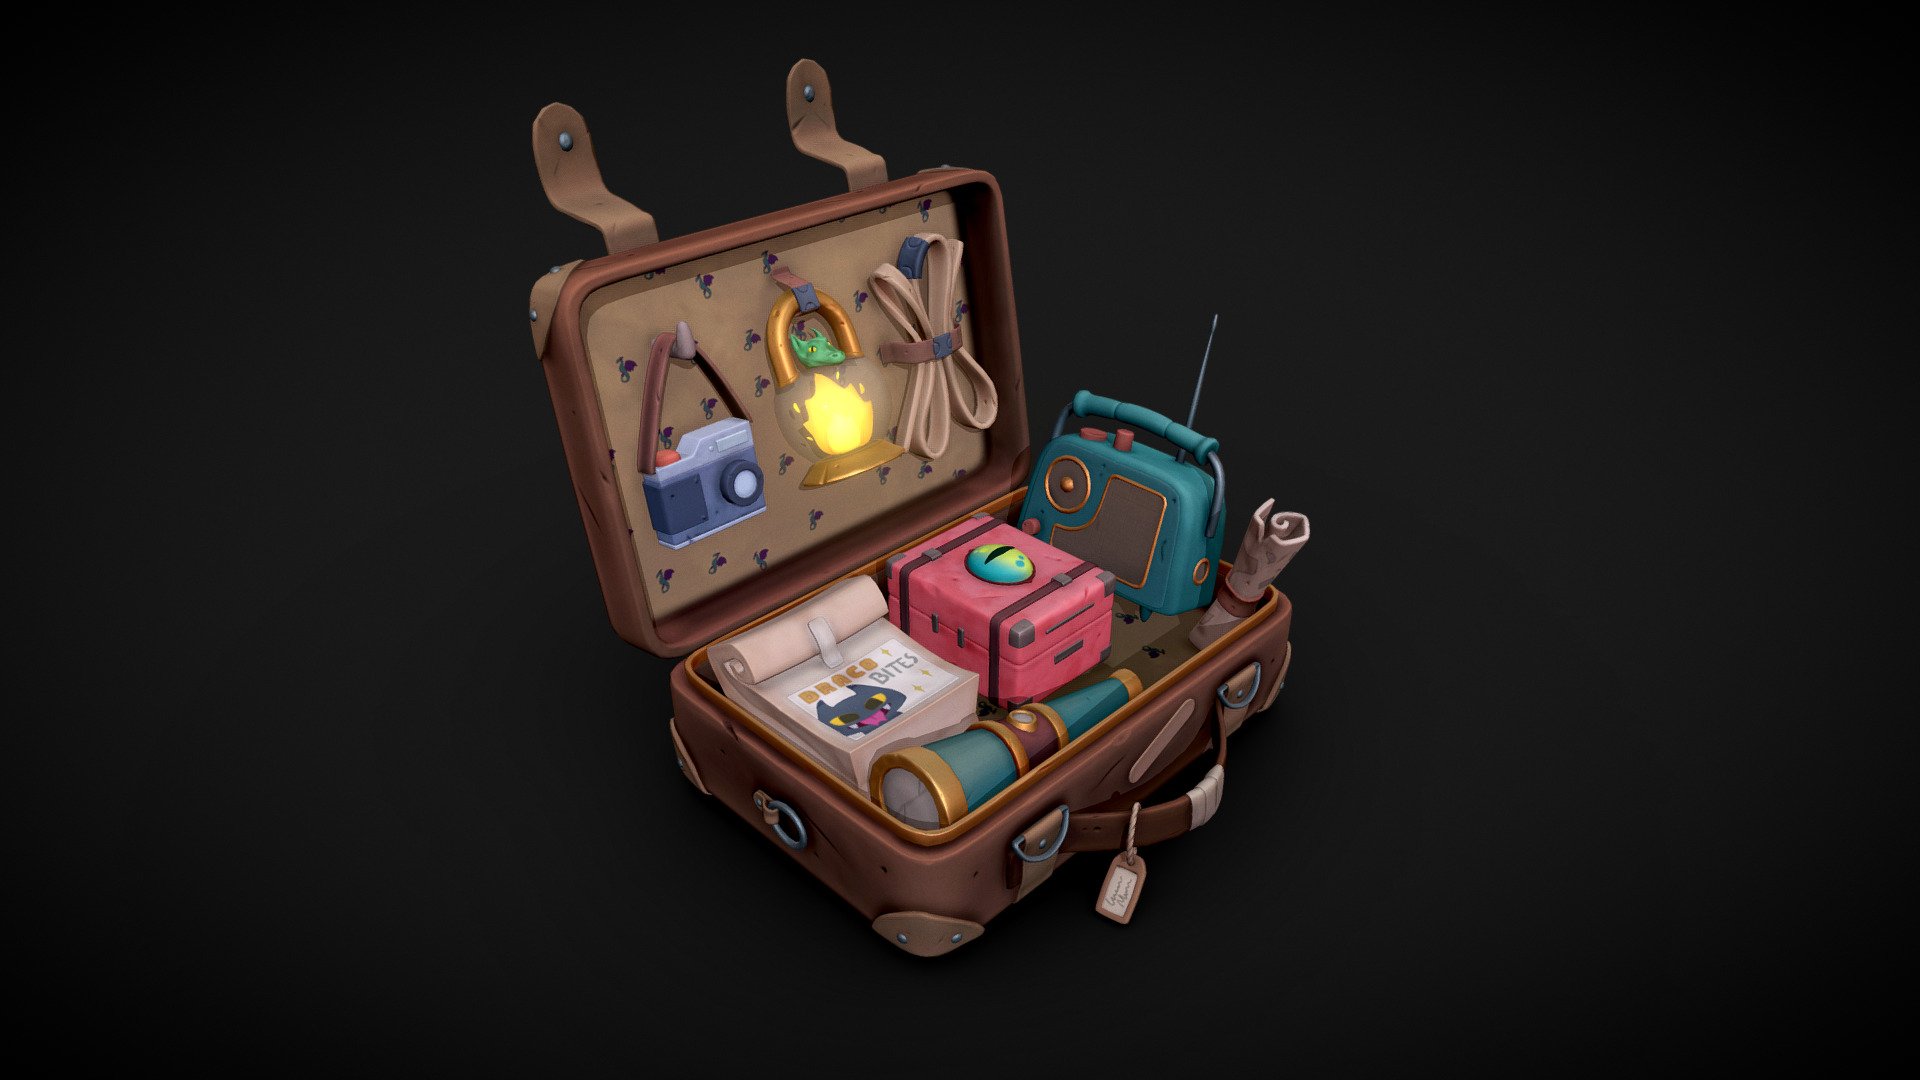 Hey folks, this time I created some stylized props based on the concept of my dear friend Pat Masiarczyk. 
https://www.artstation.com/patriciamais
During this project, I had the opportunity to practice my sculpting and texturing skills and I had a lot of fun trying out different rendering configurations!
Check out more renders and original concept on Artstation https://www.artstation.com/artwork/DAaBVe - Dragon Expedition Suitcase - 3D model by koukwst 3d model